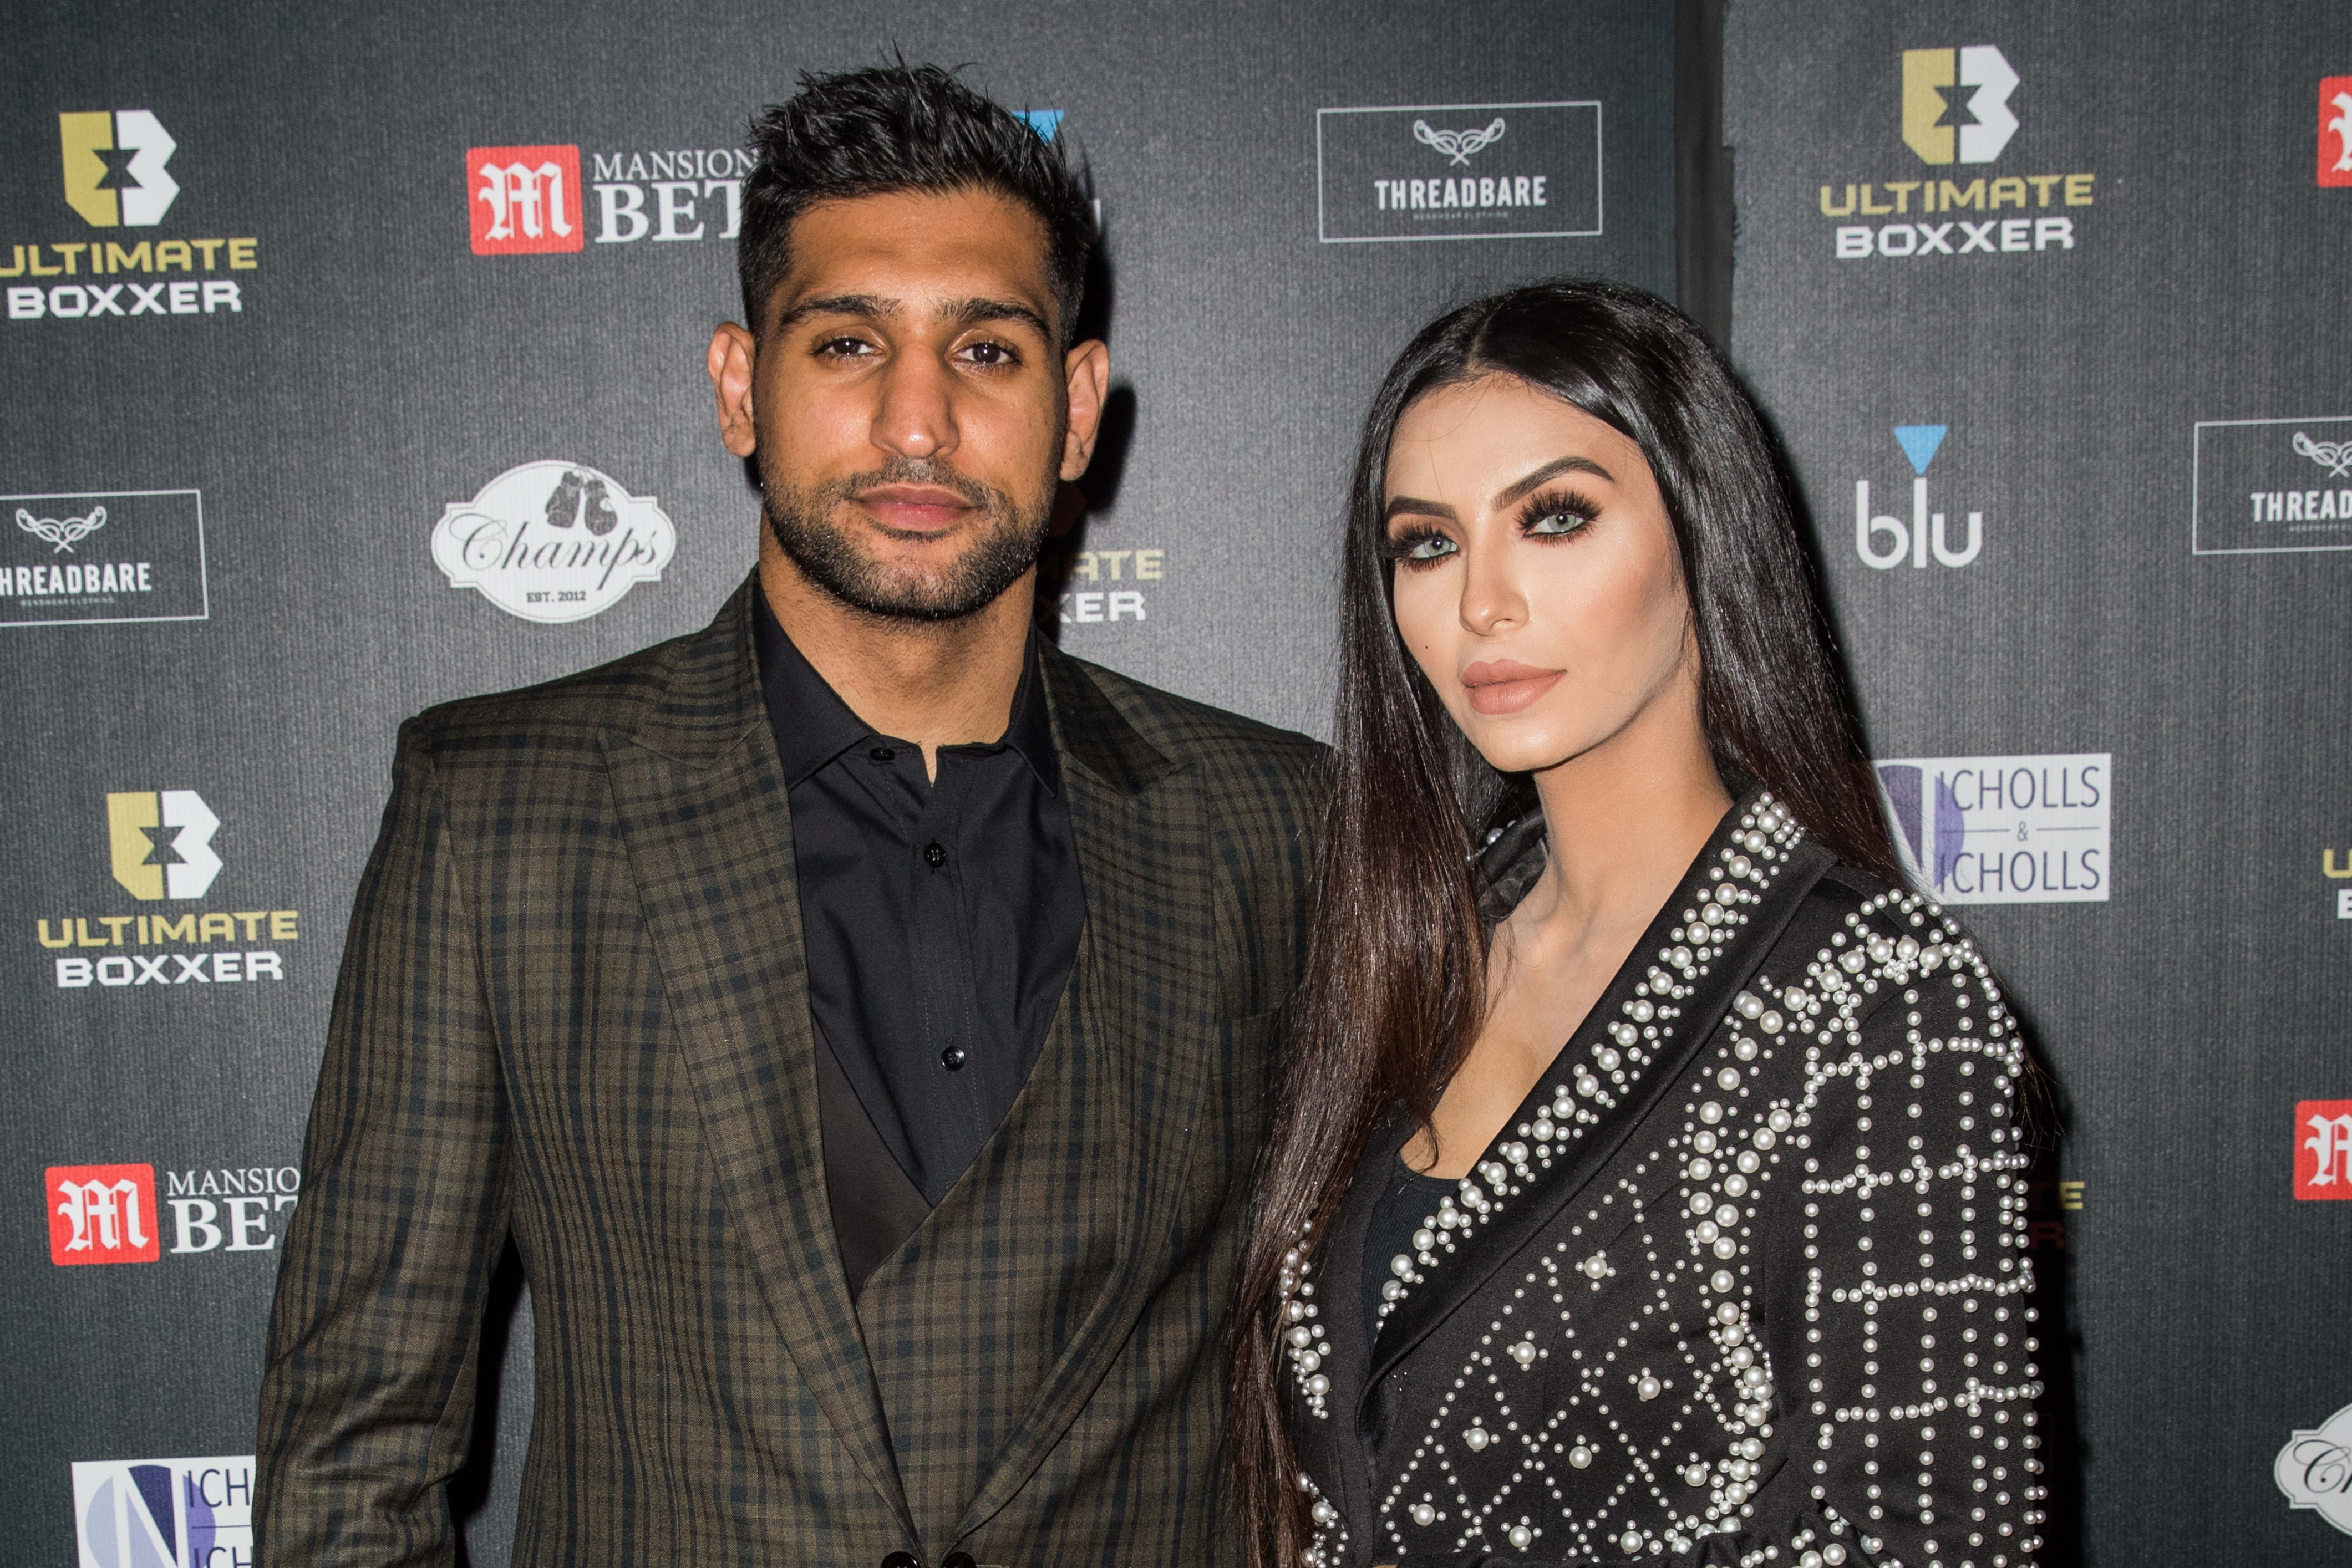 , Amir Khan regrets accusing Anthony Joshua of having an affair with his wife when he saw texts on her phone